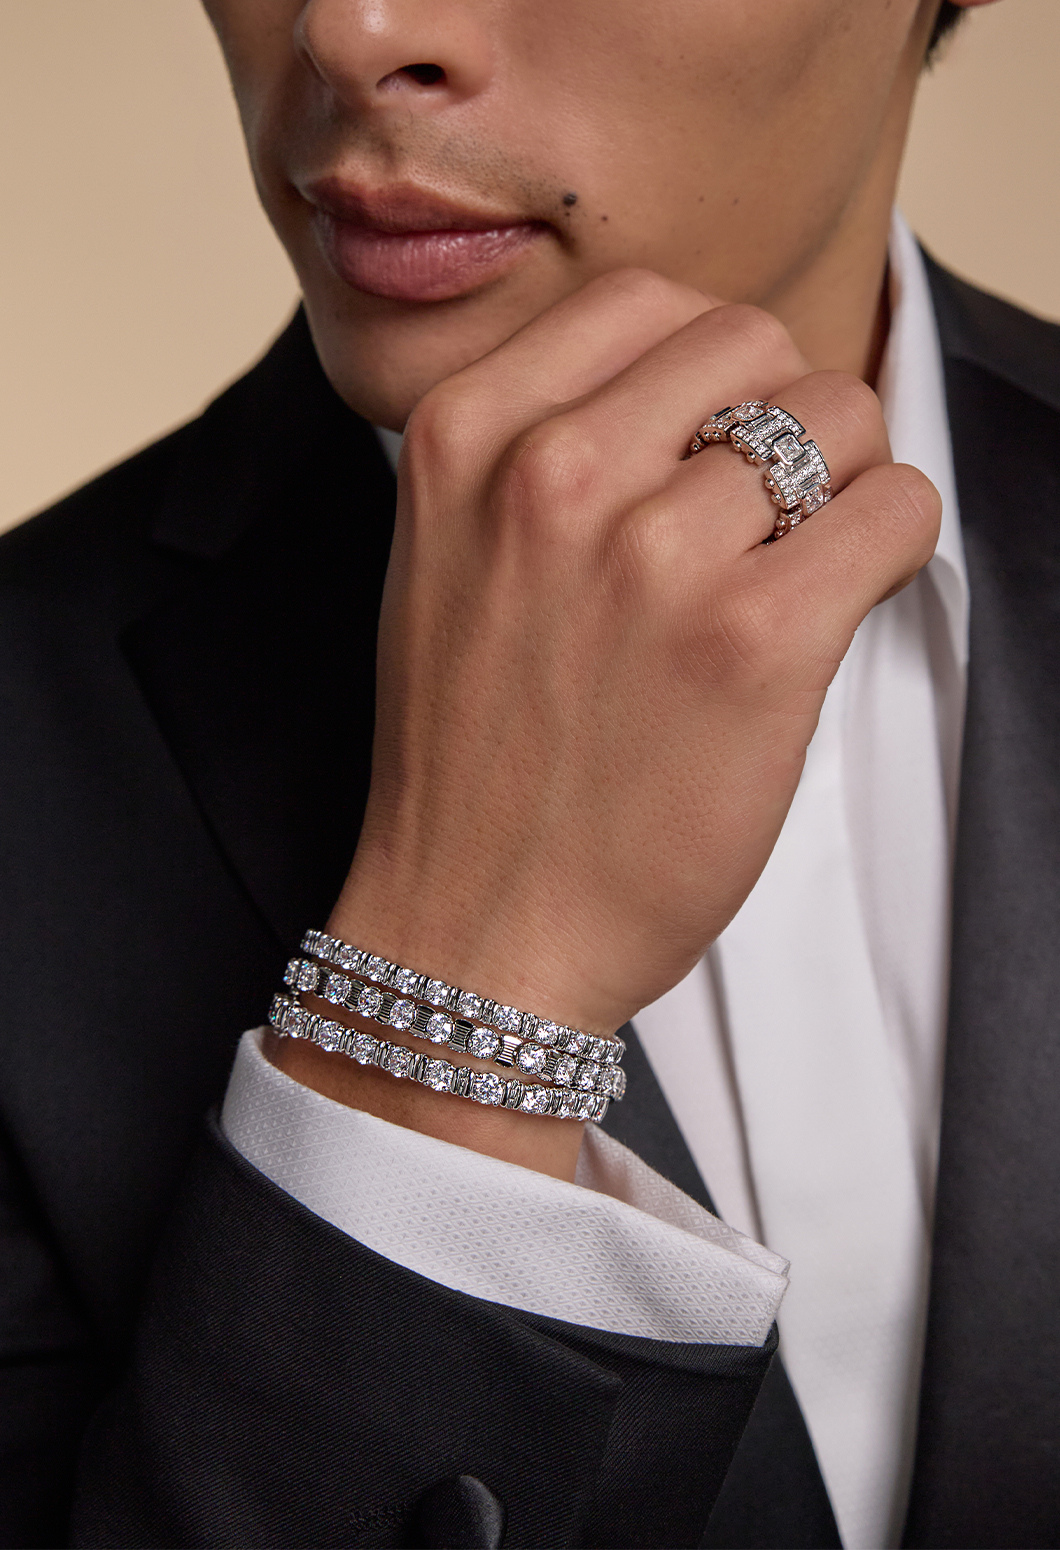 Three men's tennis bracelets displayed on the models hands with a fashion band on his right hand